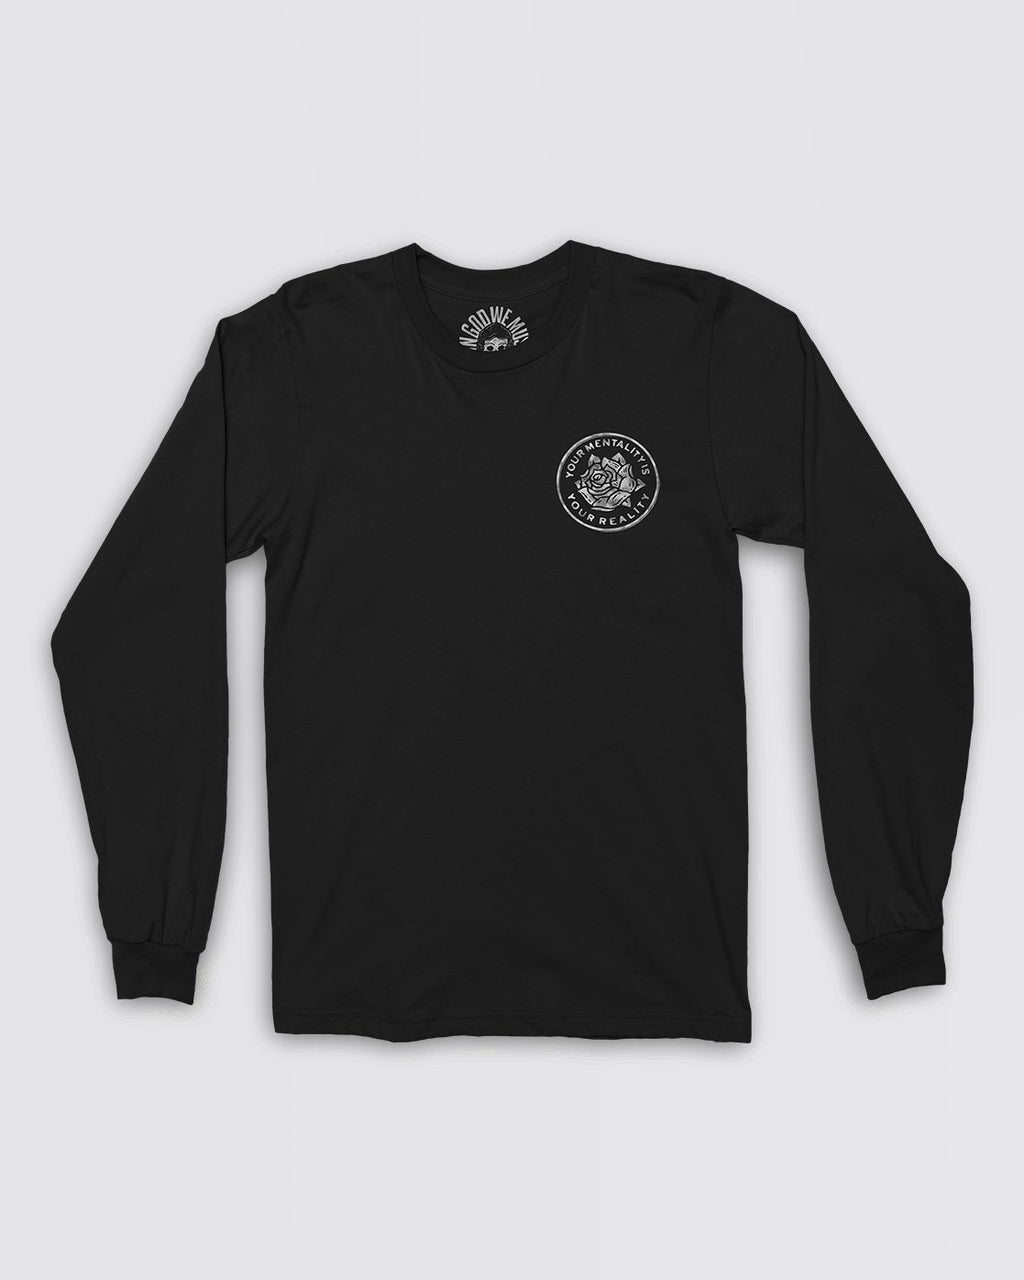 V.4 Mentality Long Sleeve Tee – In God We Must